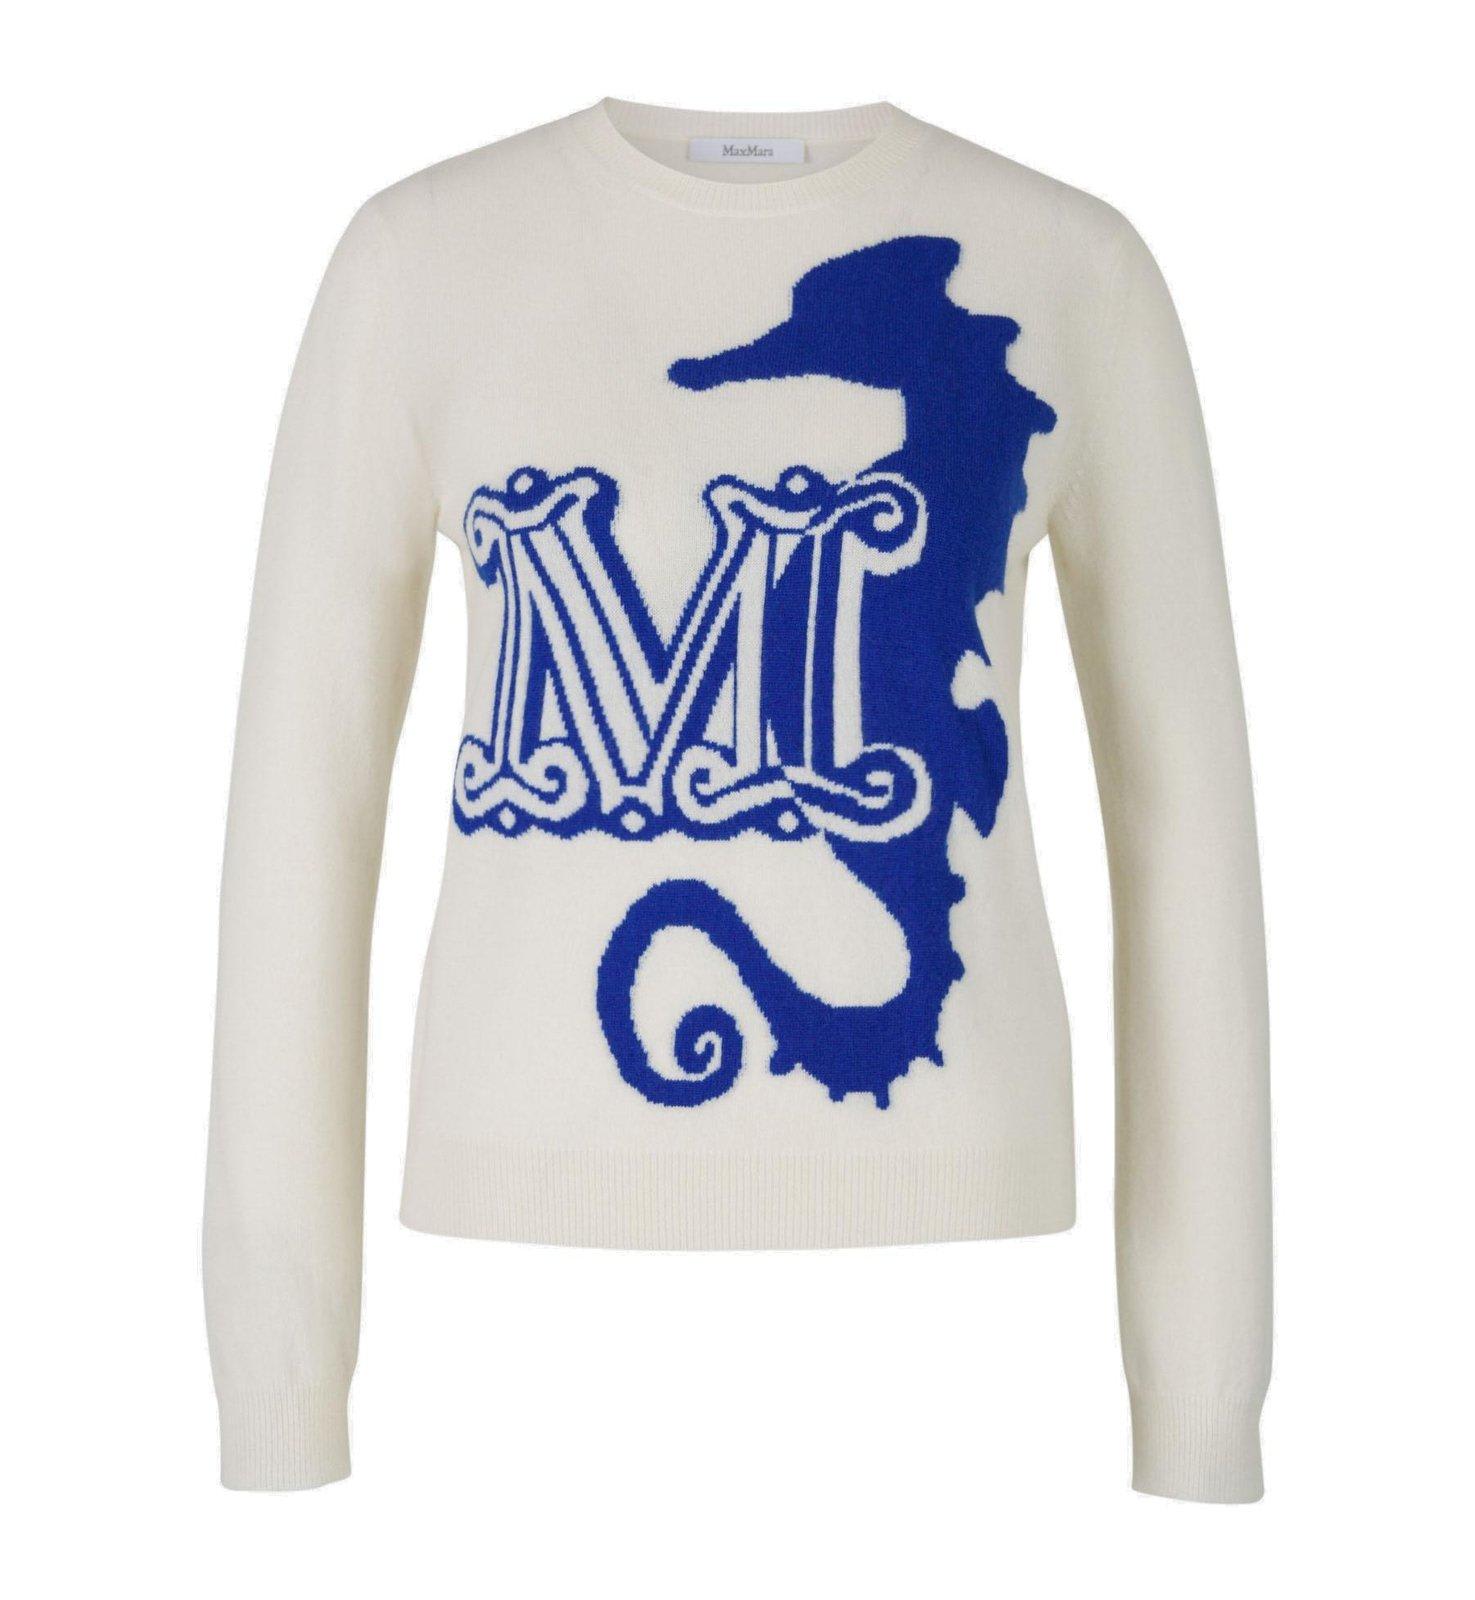 MAX MARA GRAPHIC LOGO EMBROIDERED KNIT SWEATER